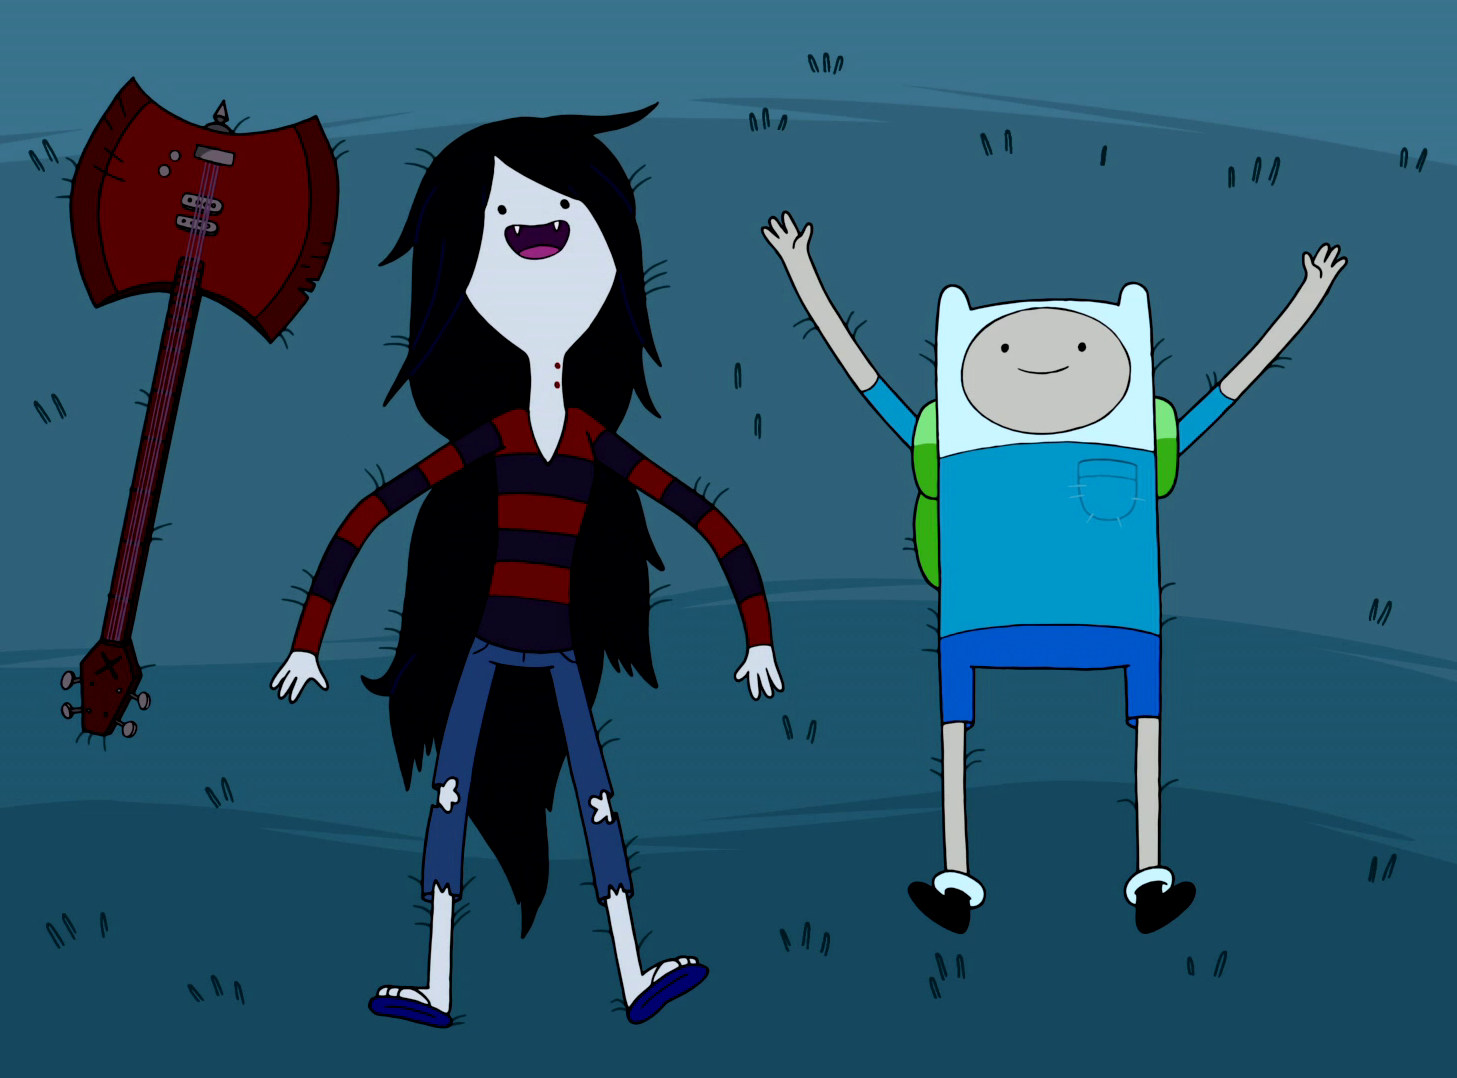 Image S2e1 Finn And Marceline Lying On Grass Png Adventure Time Wiki Fandom Powered By Wikia